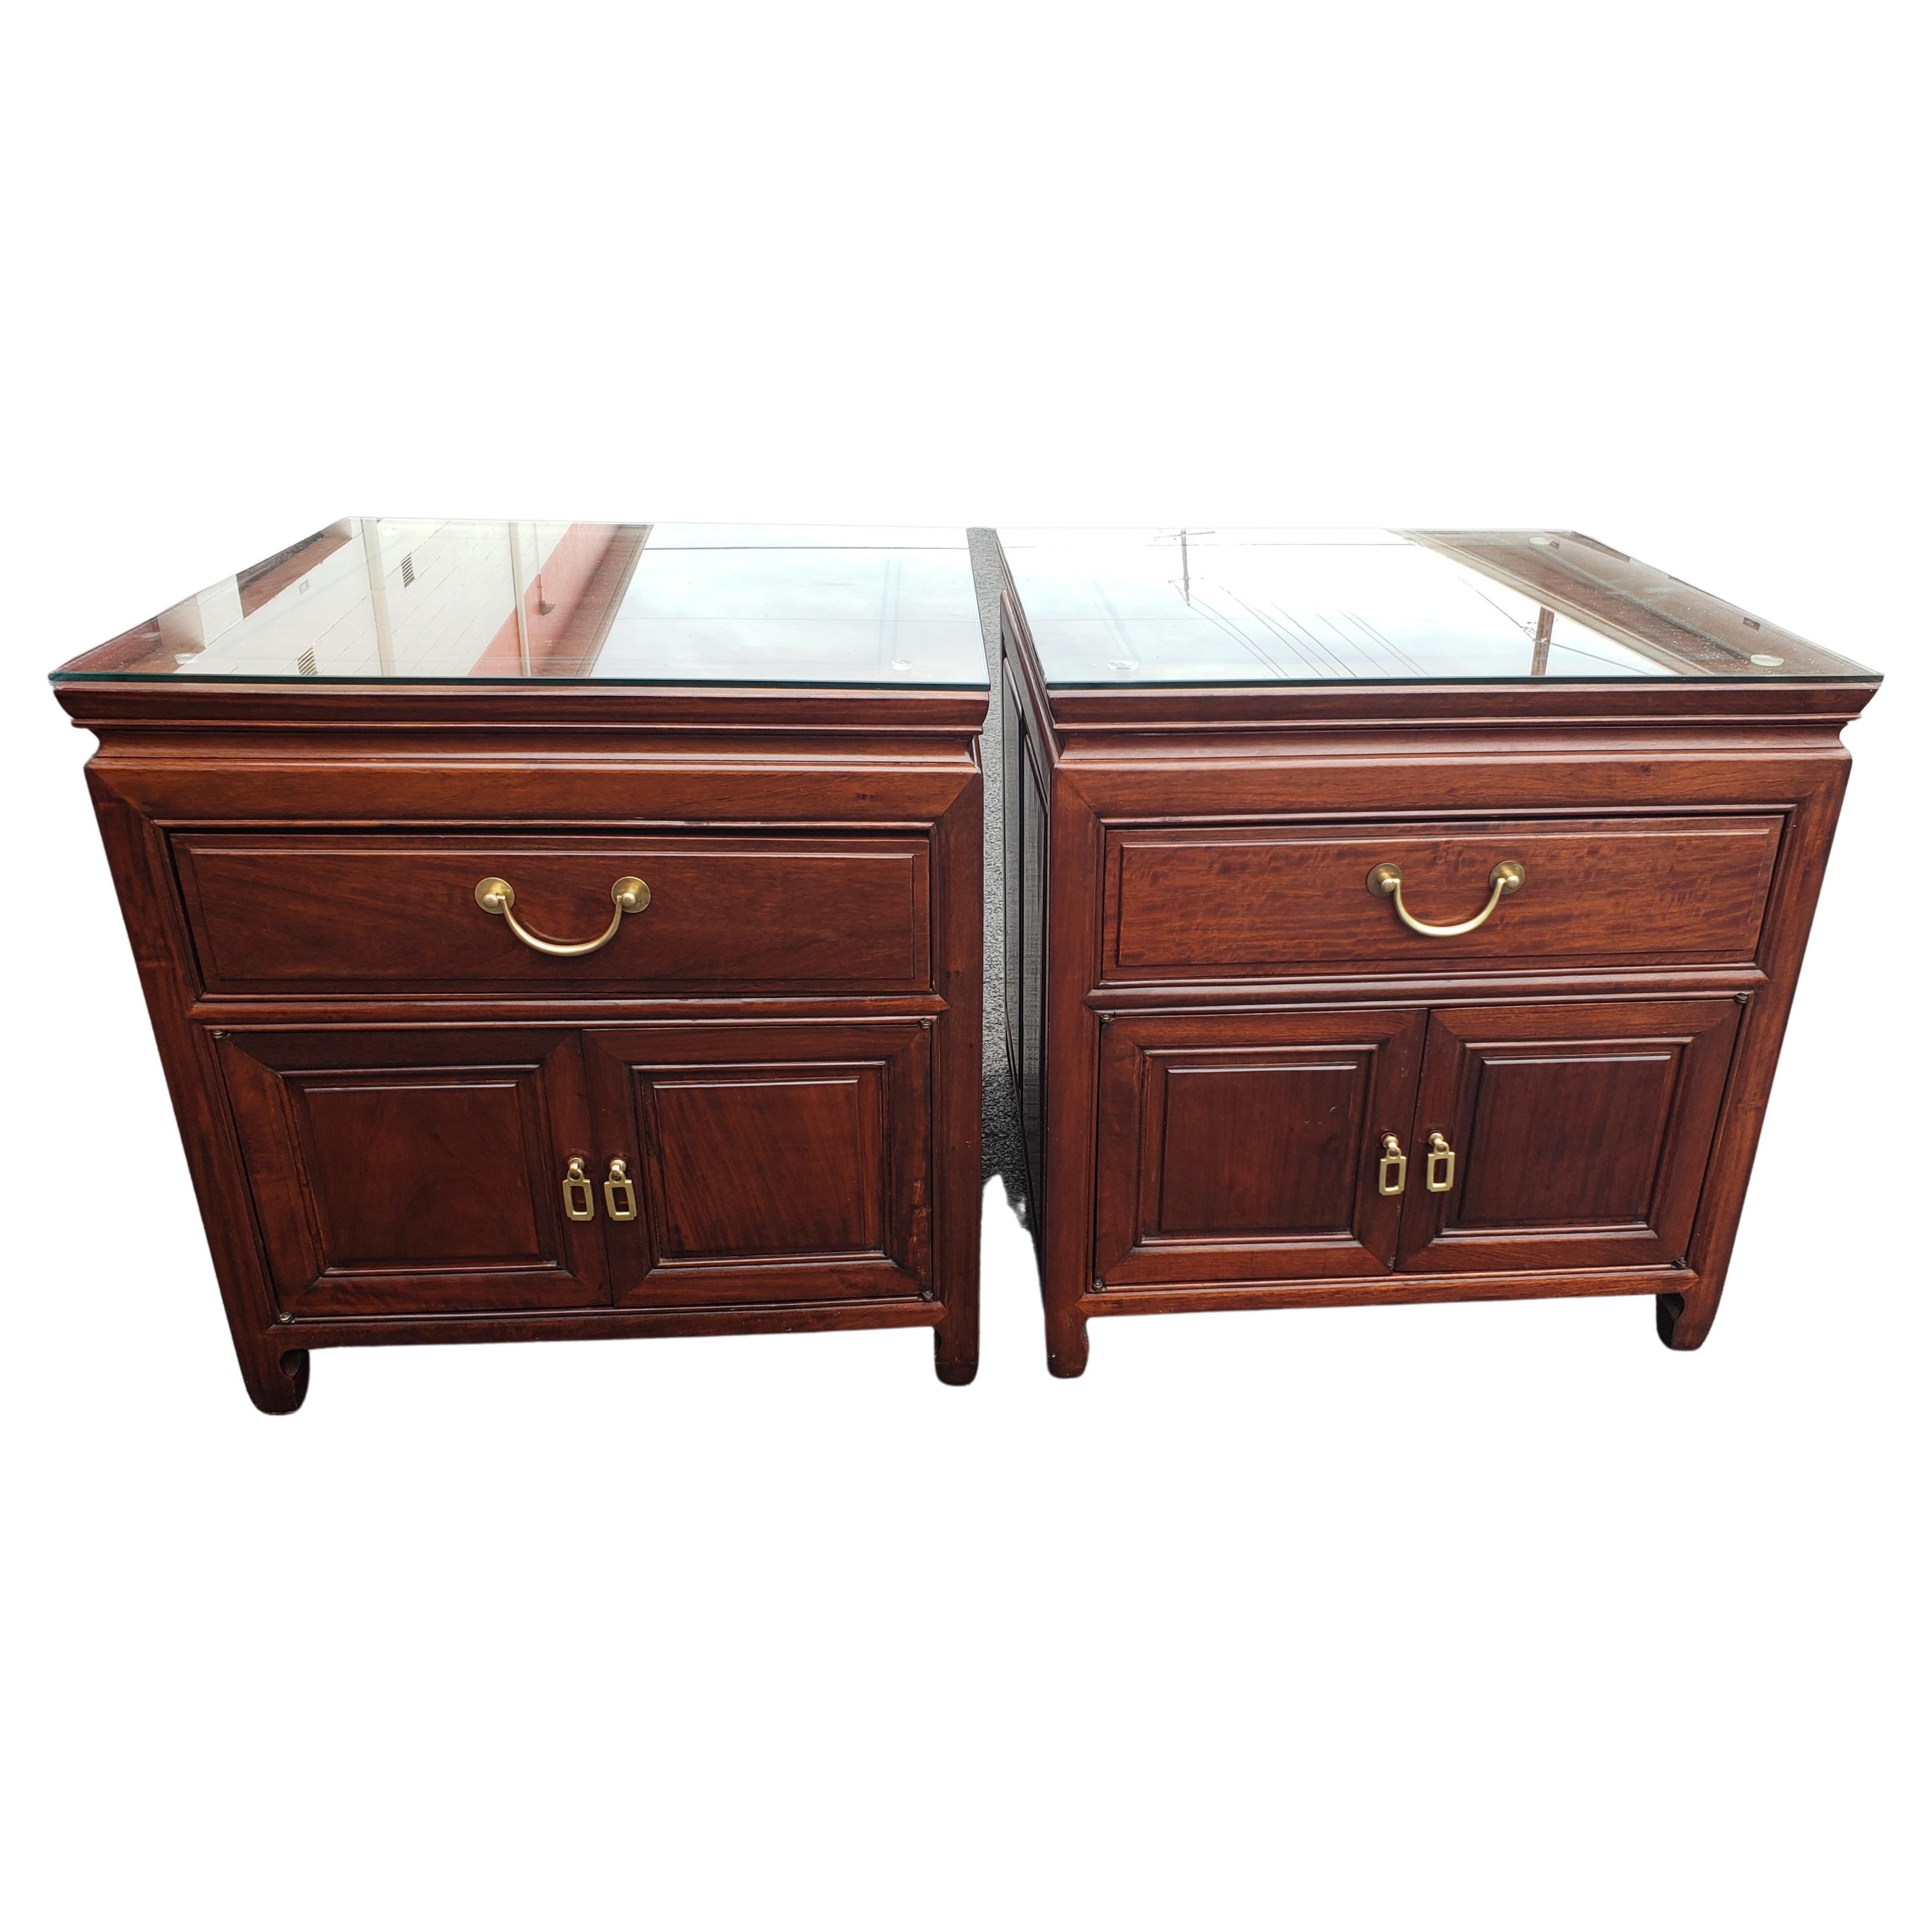 Hong Kong George Zee Asian American Rosewood Chippendale Side Tables, circa 1960s, a Pair For Sale